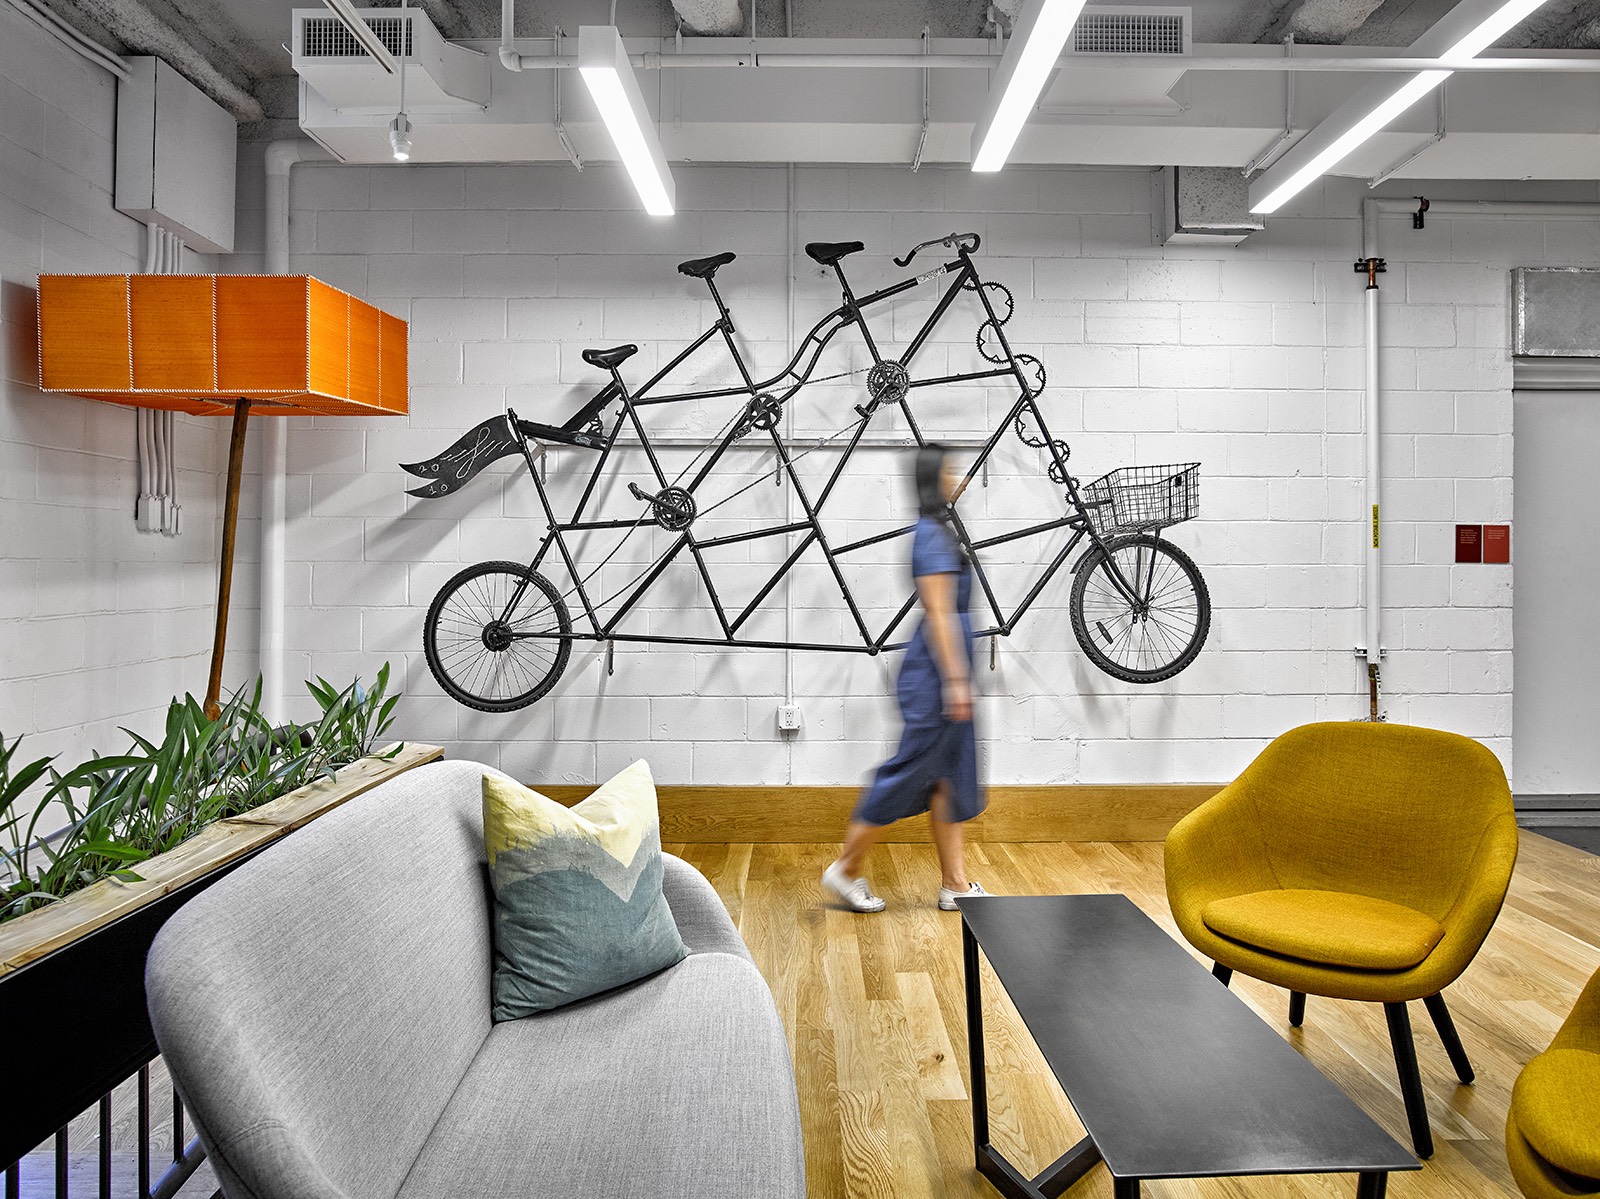 A Tour of Etsy’s Super Cool Brooklyn Headquarters - Officelovin'